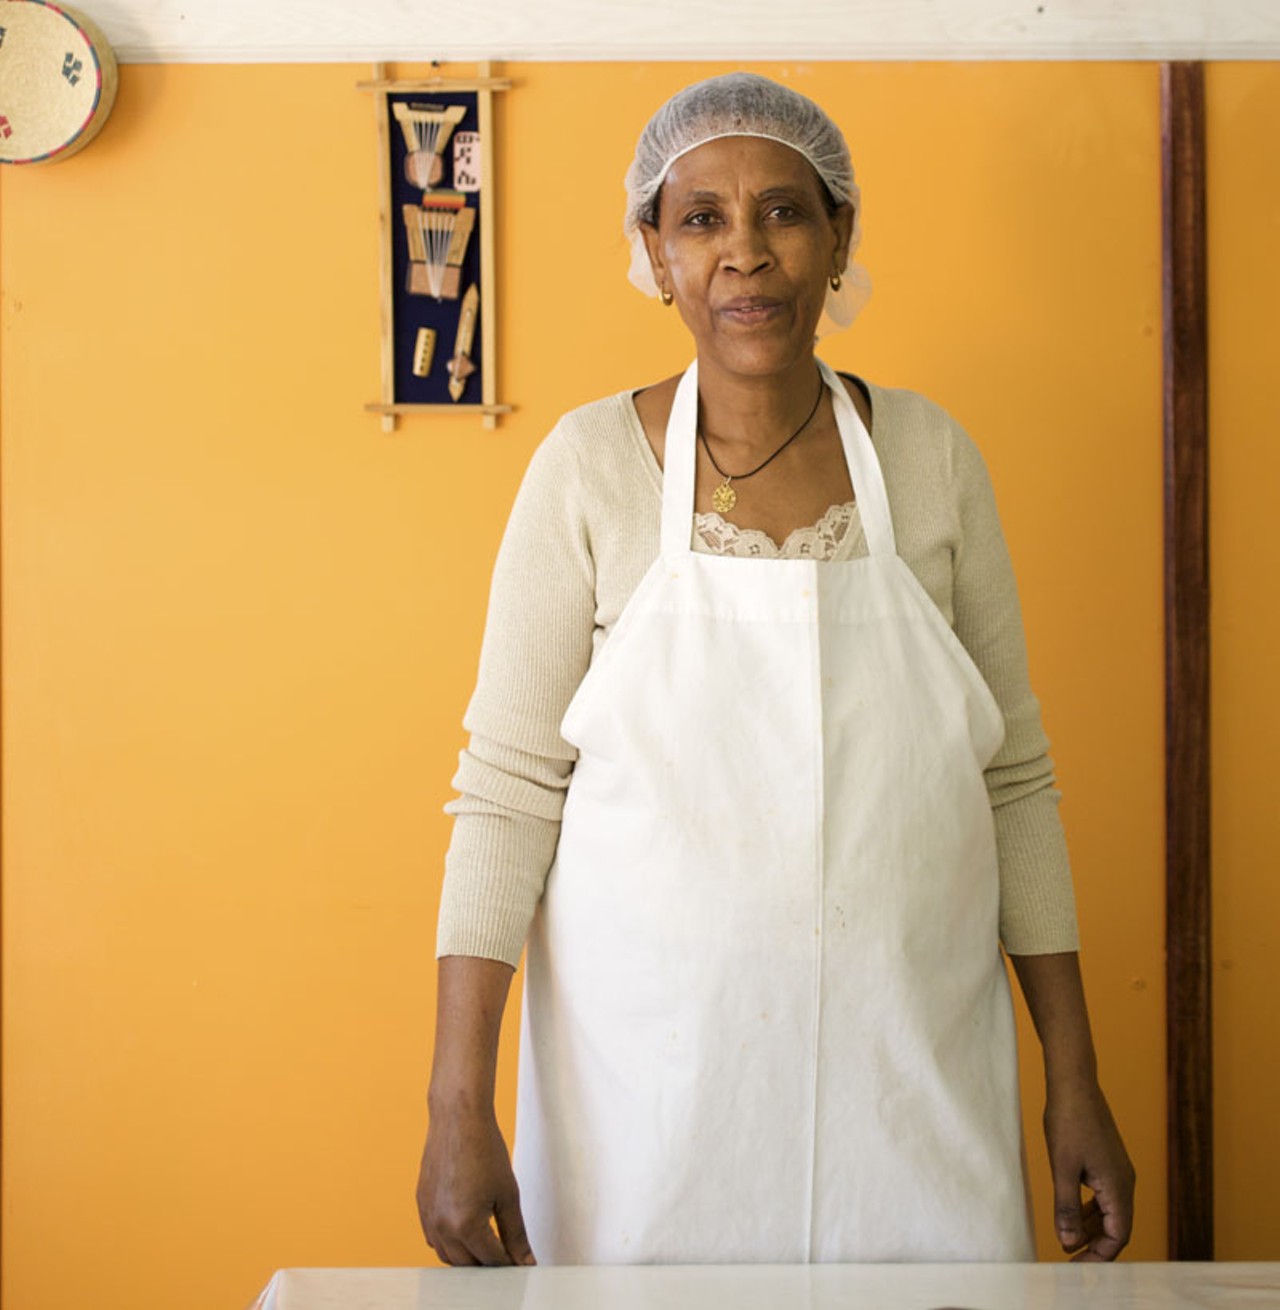 Also helping out in the kitchen is Banche Bekele.